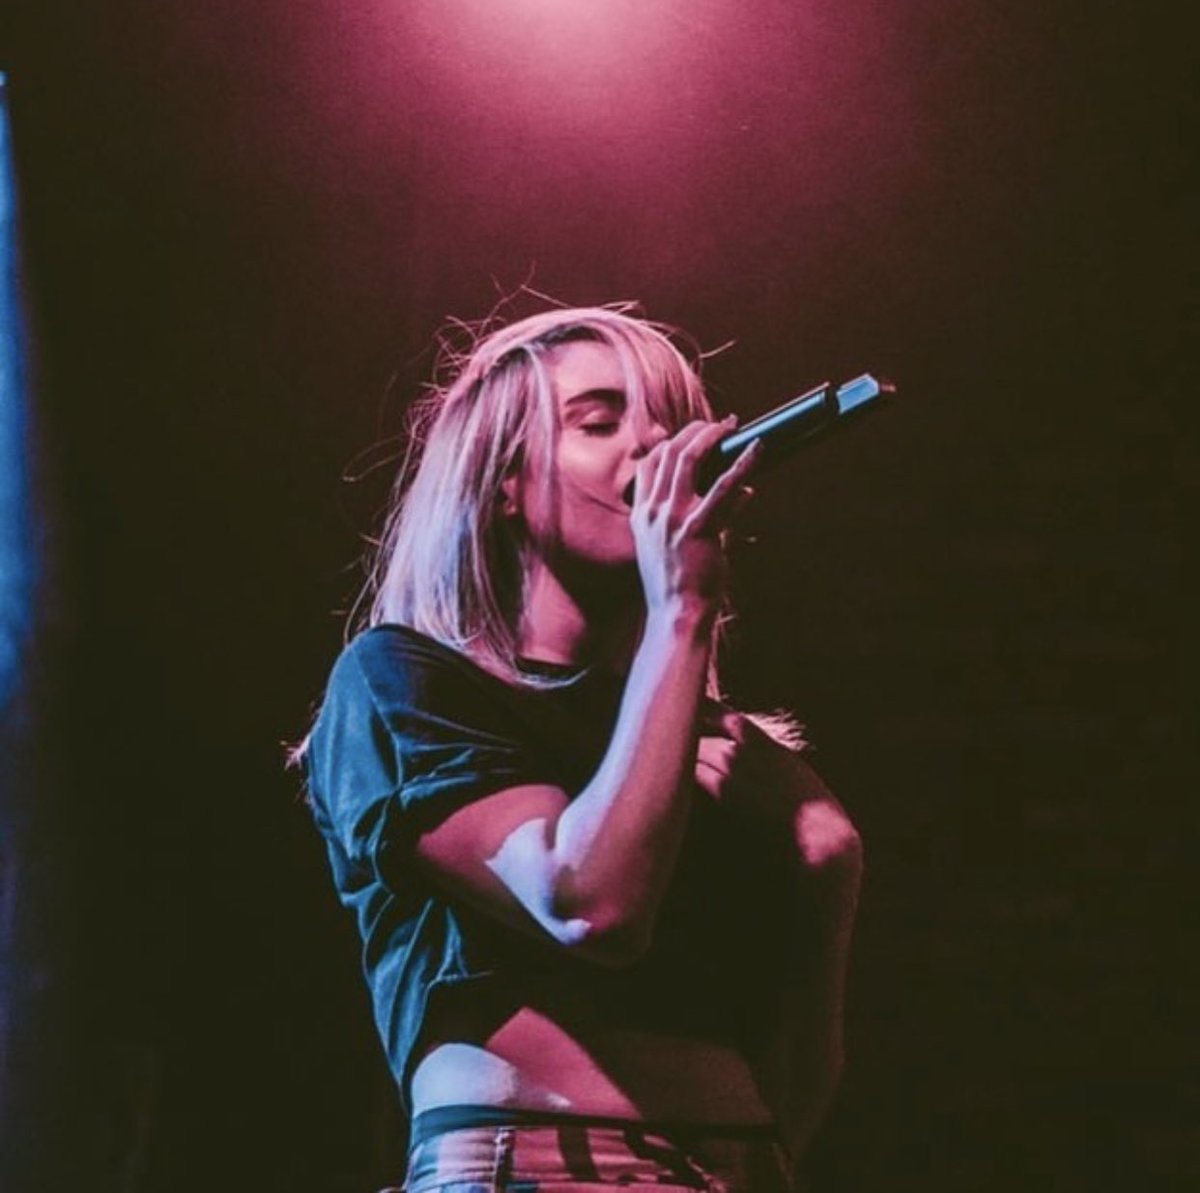 What are 3 @KIIARA songs you’d love to hear live? 🤍